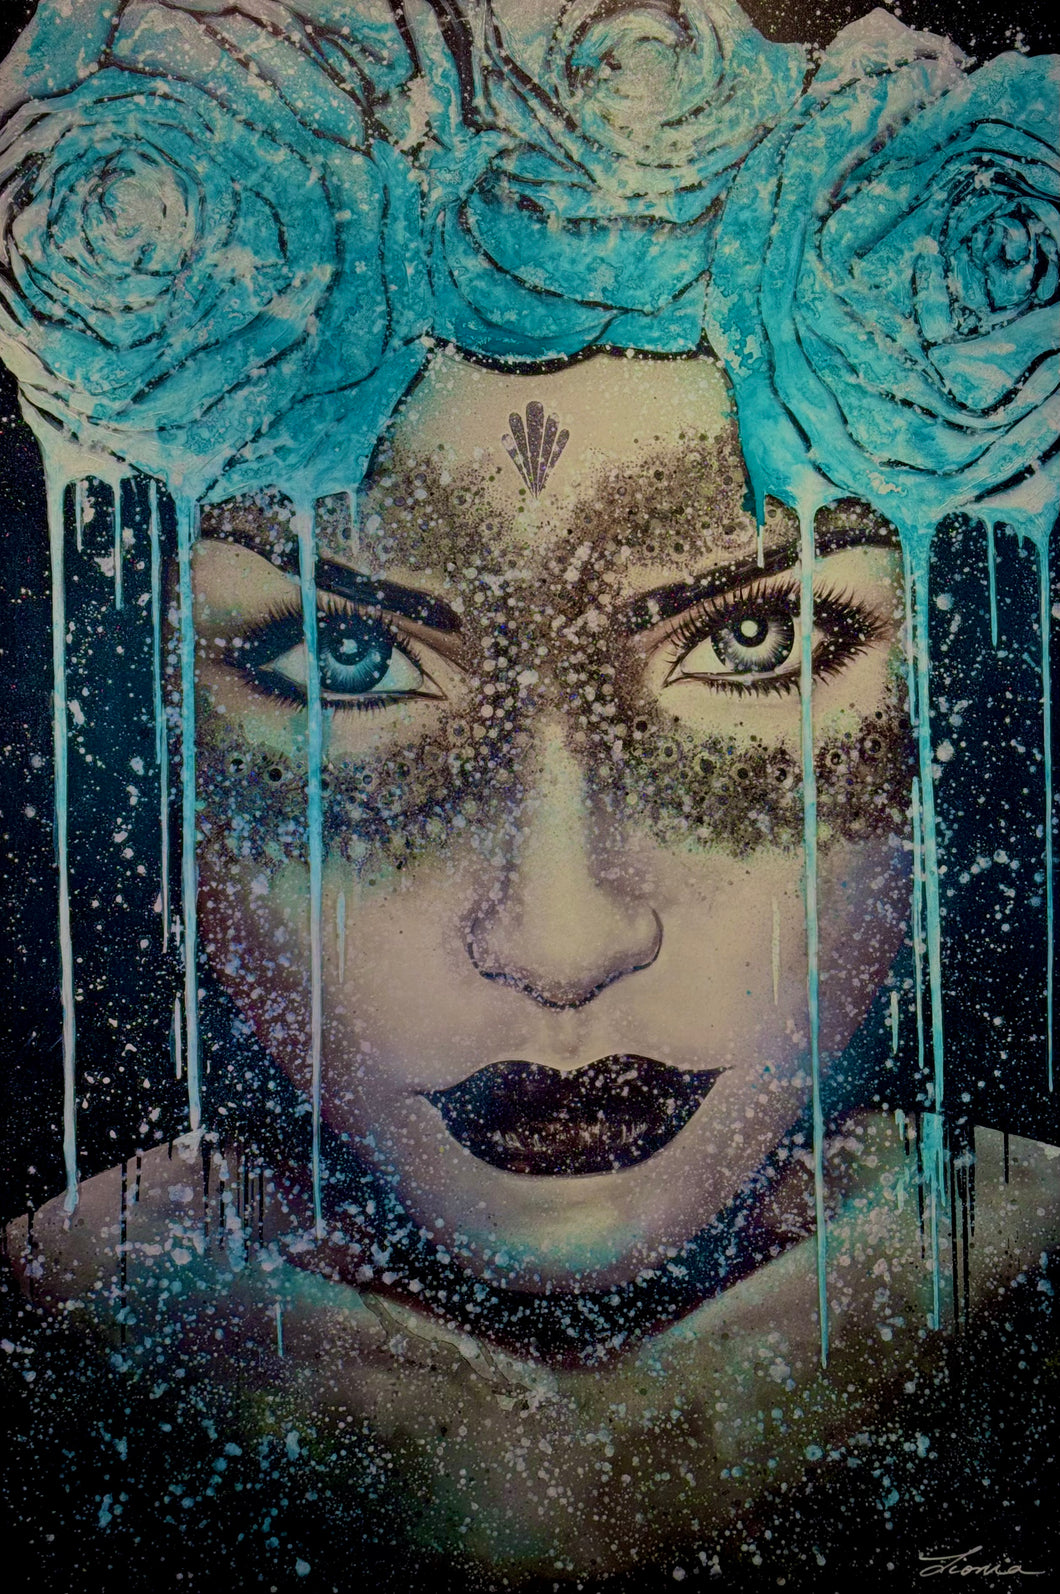 Fuego Celestial - Portrait of girl. Inspired by the Art Deco / Gatsby era lifestyle of the 1920's.